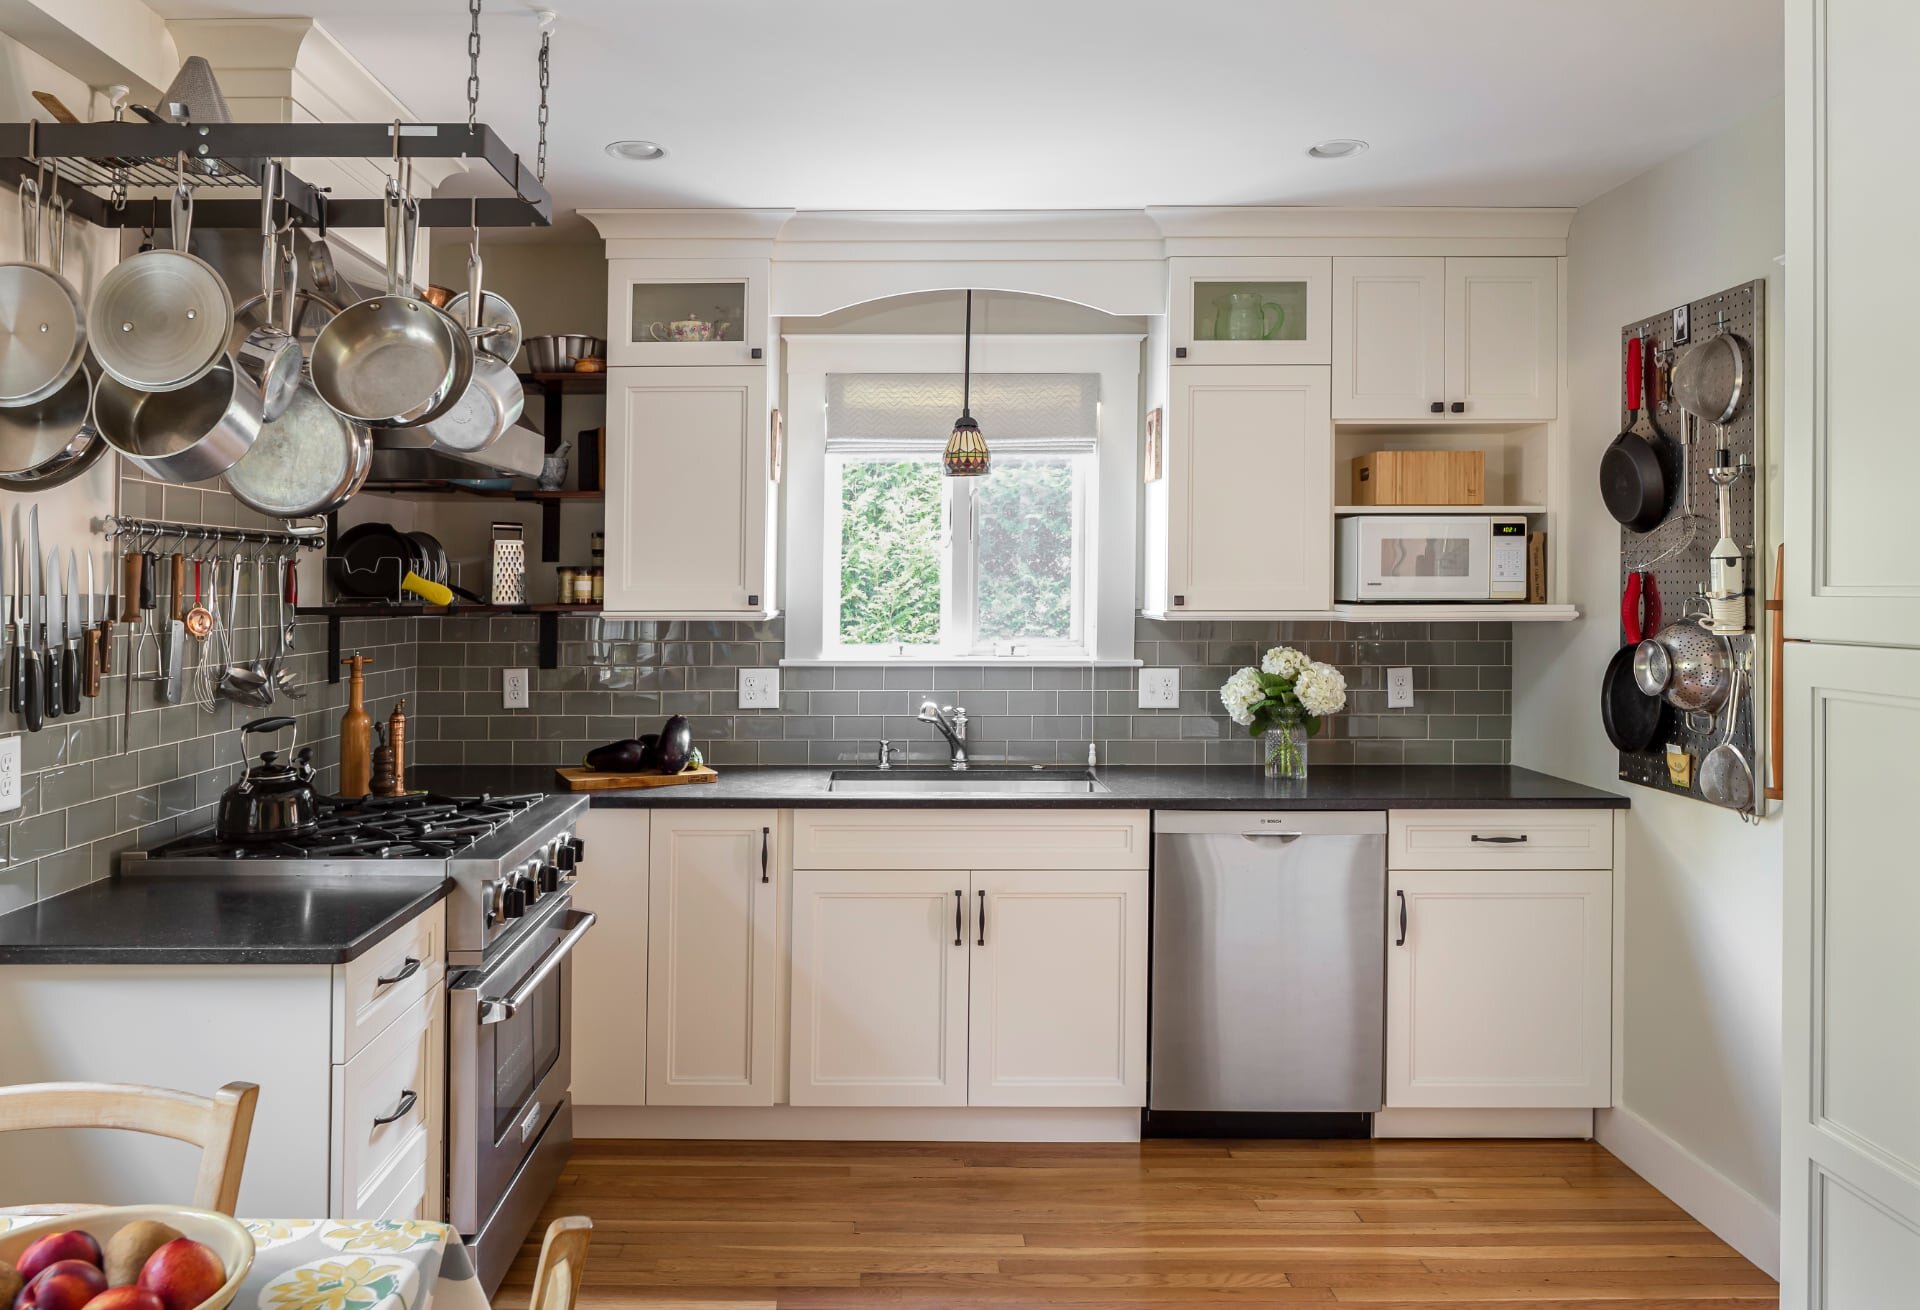 10 Kitchen Cabinet Must-Haves